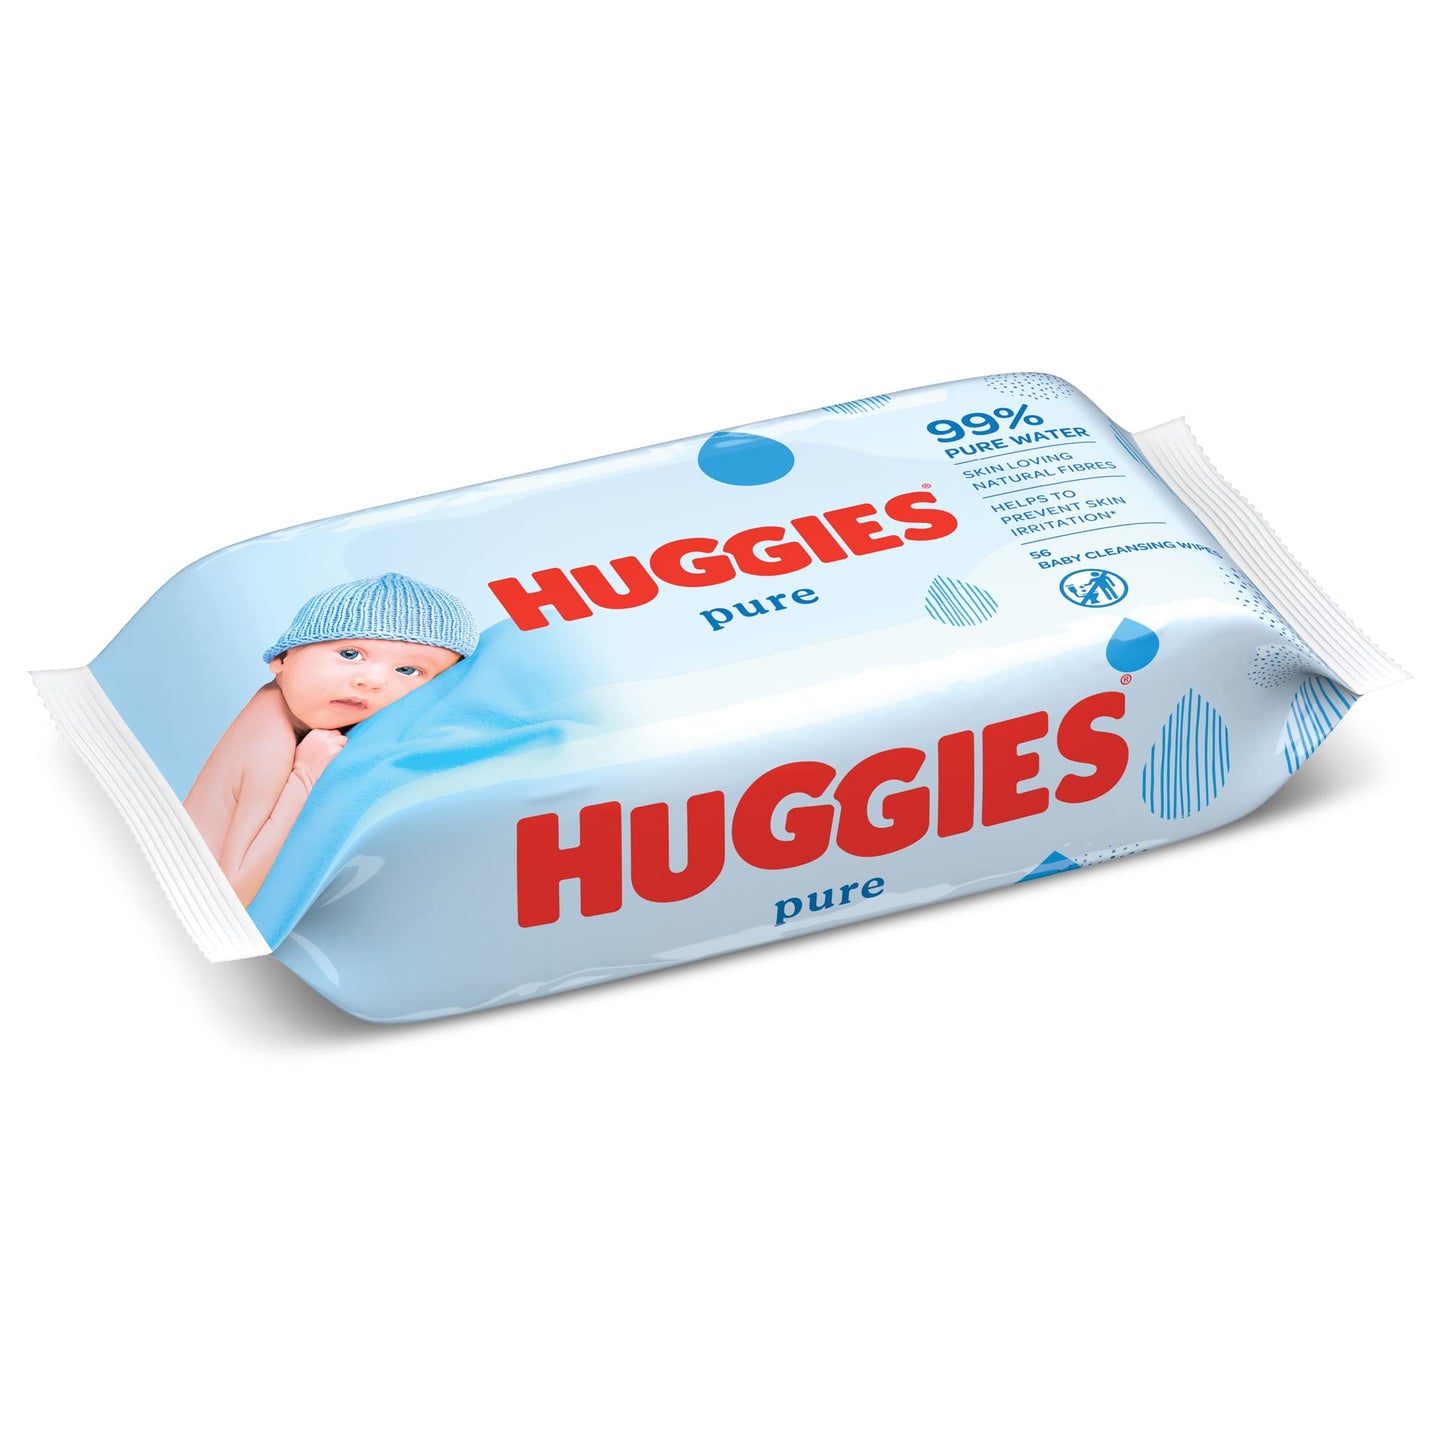 Huggies,Pure Baby Wipes,Pack of 56 Wipes,Made from Natural Plant-Based Fibers,Safe and Gentle,Paraben & Alcohol Free